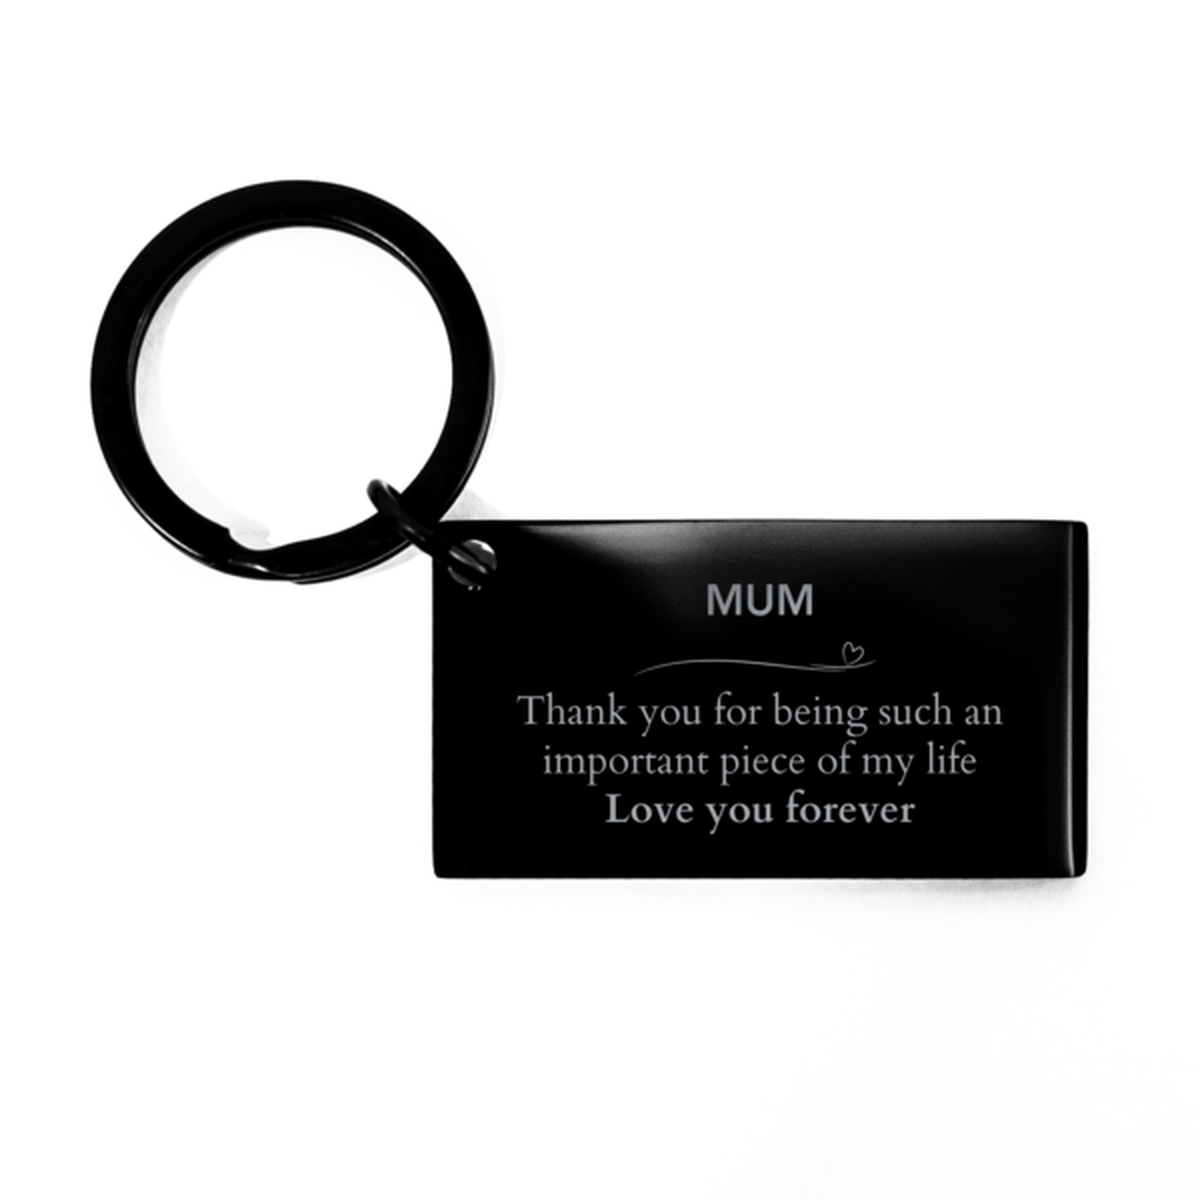 Appropriate Mum Keychain Epic Birthday Gifts for Mum Thank you for being such an important piece of my life Mum Christmas Mothers Fathers Day